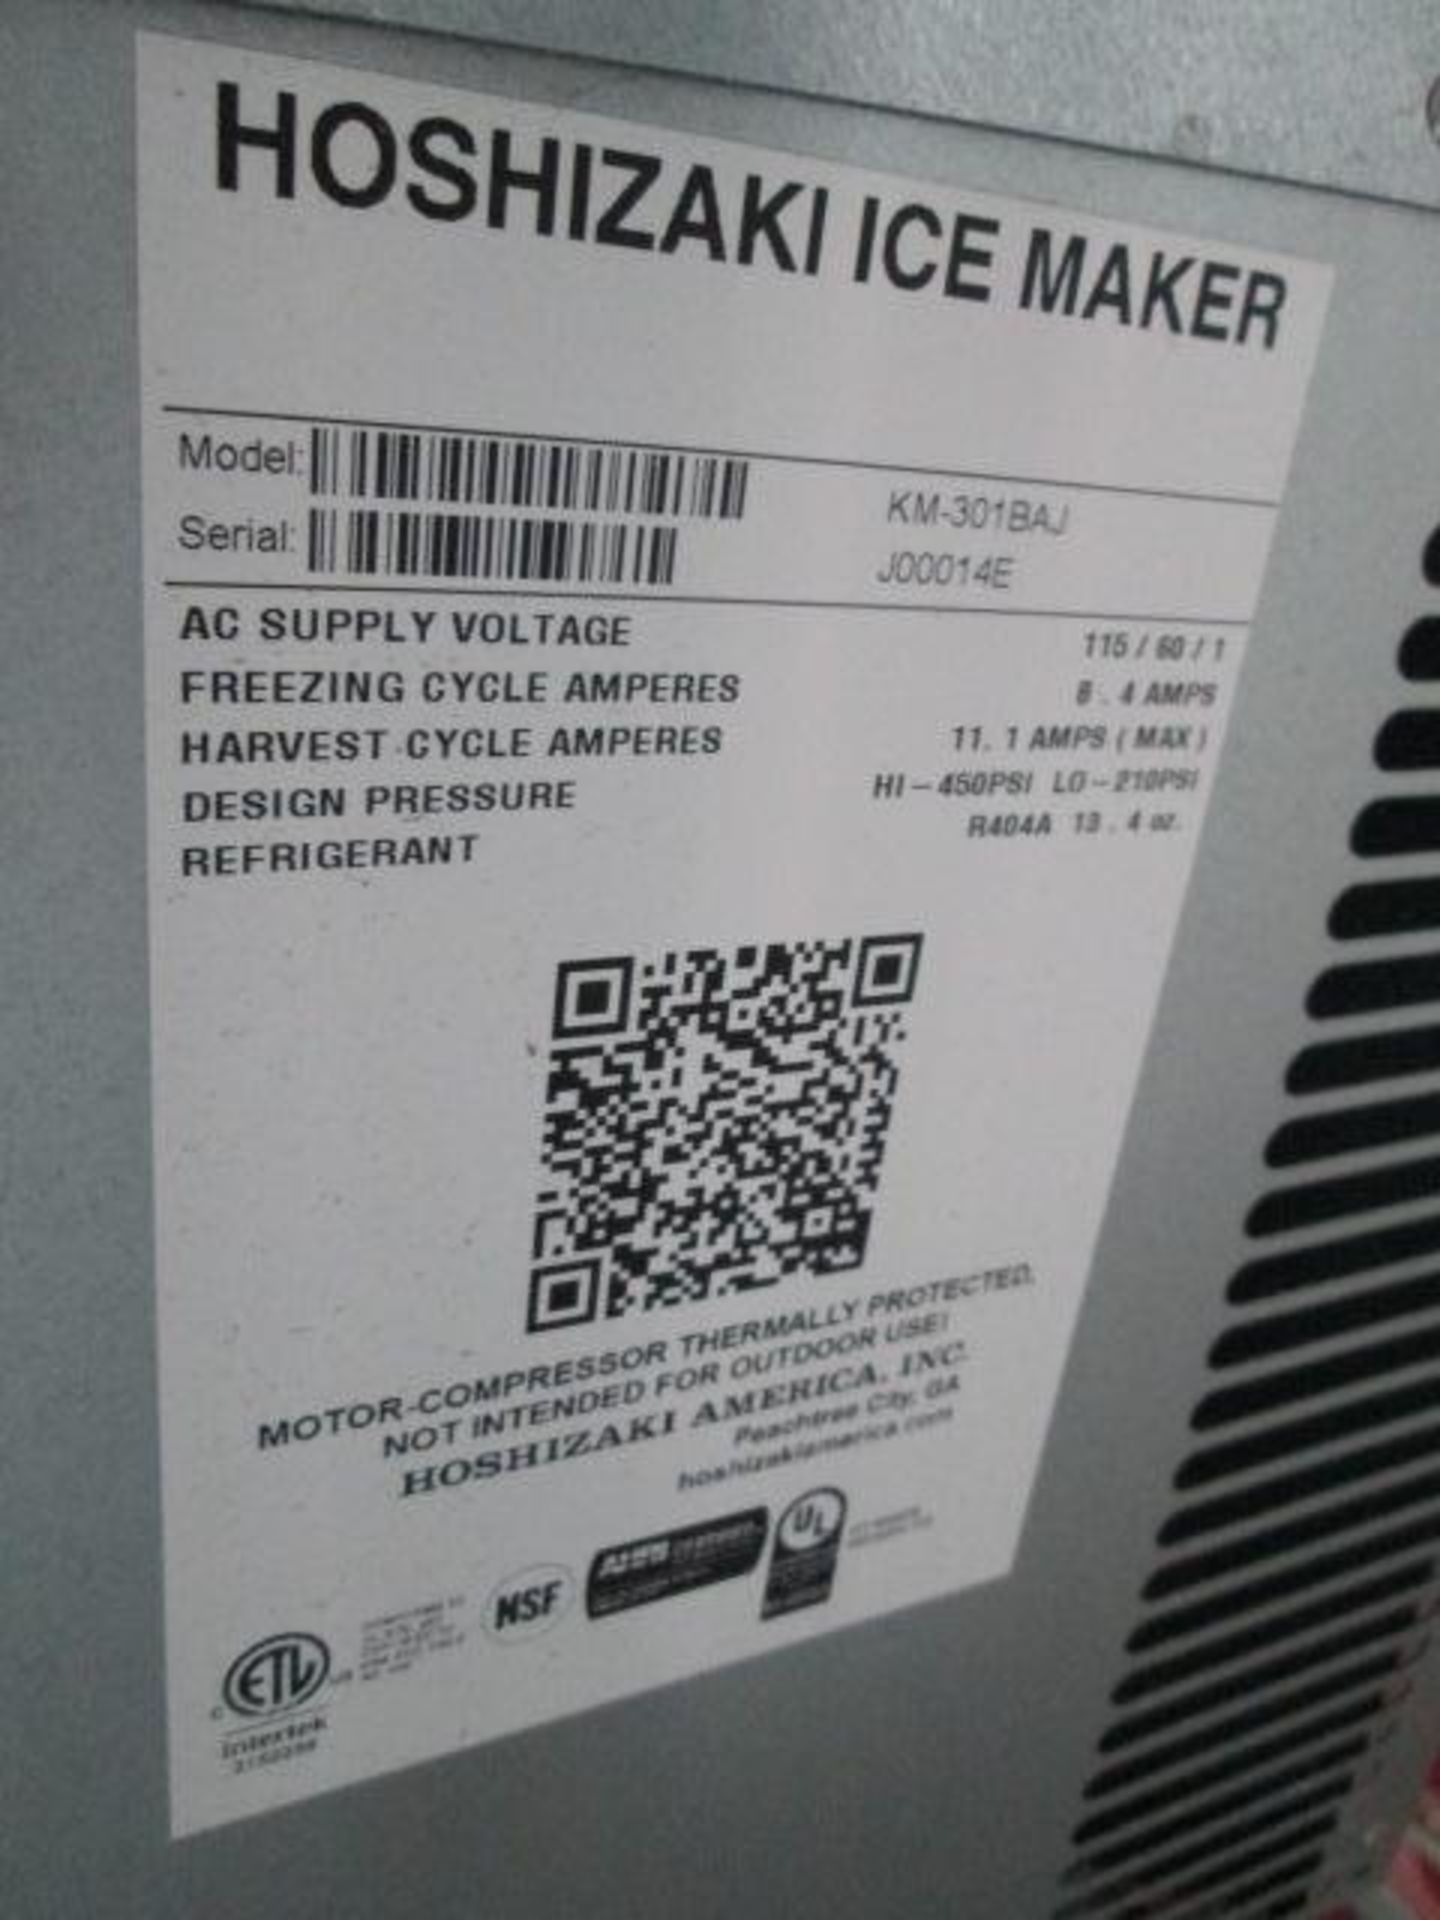 Ice Maker - Image 3 of 3